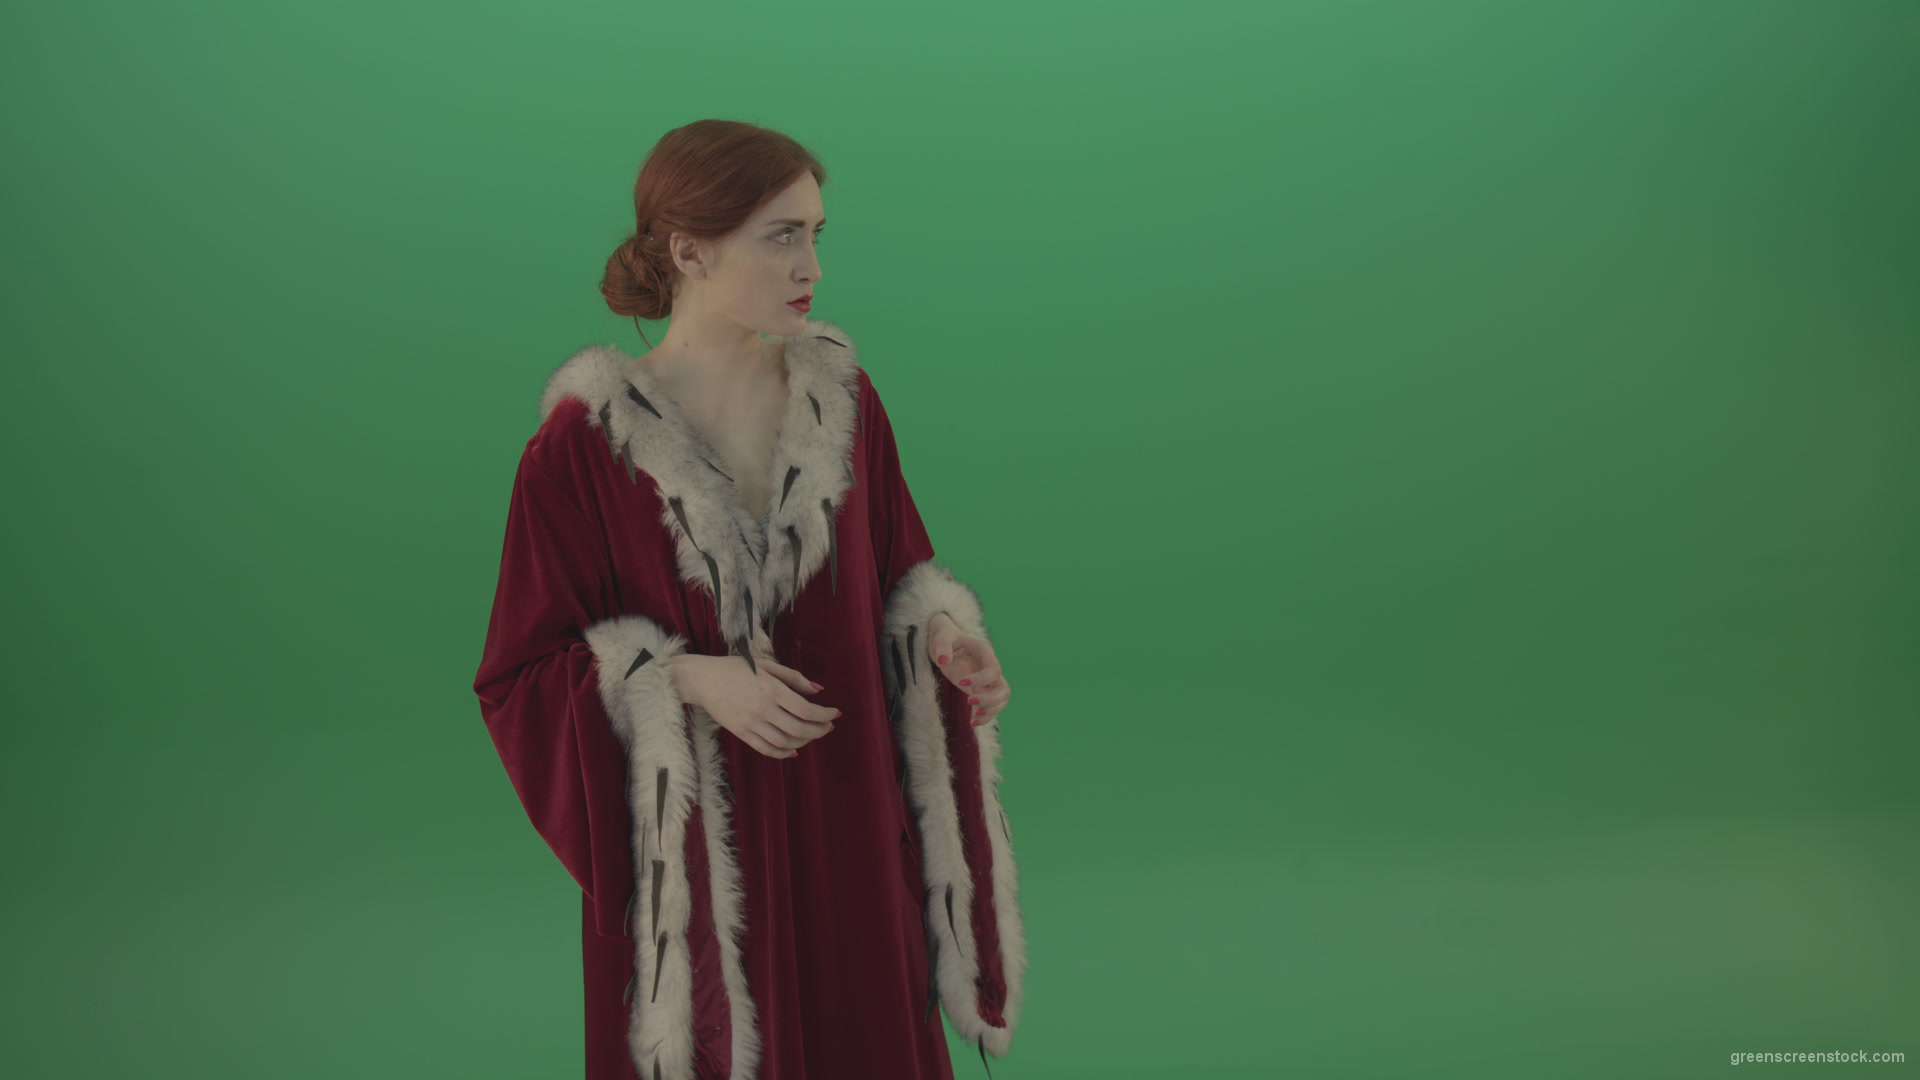 Girl-is-dressed-in-a-red-cloak-shoots-proton-lasers-_001 Green Screen Stock